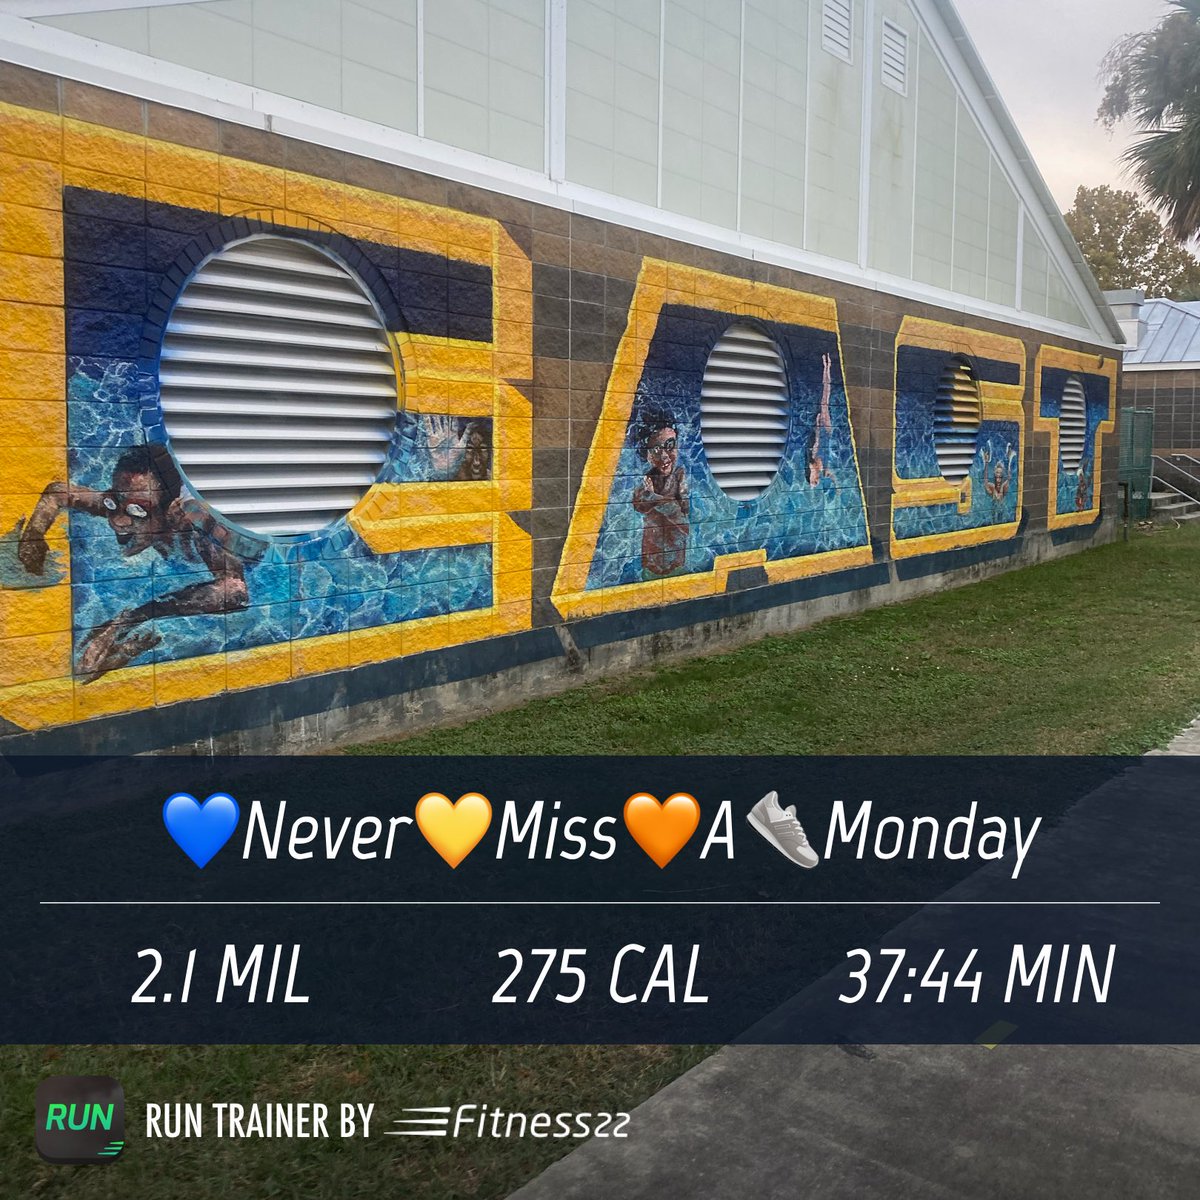 Never Miss A Monday! 
The encouragement to never miss a Monday is about consistency. It's about starting your week well and building momentum for the week to come. 
#NeverMissAMonday 
#JoyandJustice
#PreventiveCare
#GratitudeTREK 
#LouisianaTREKS
#GirlTREK👟